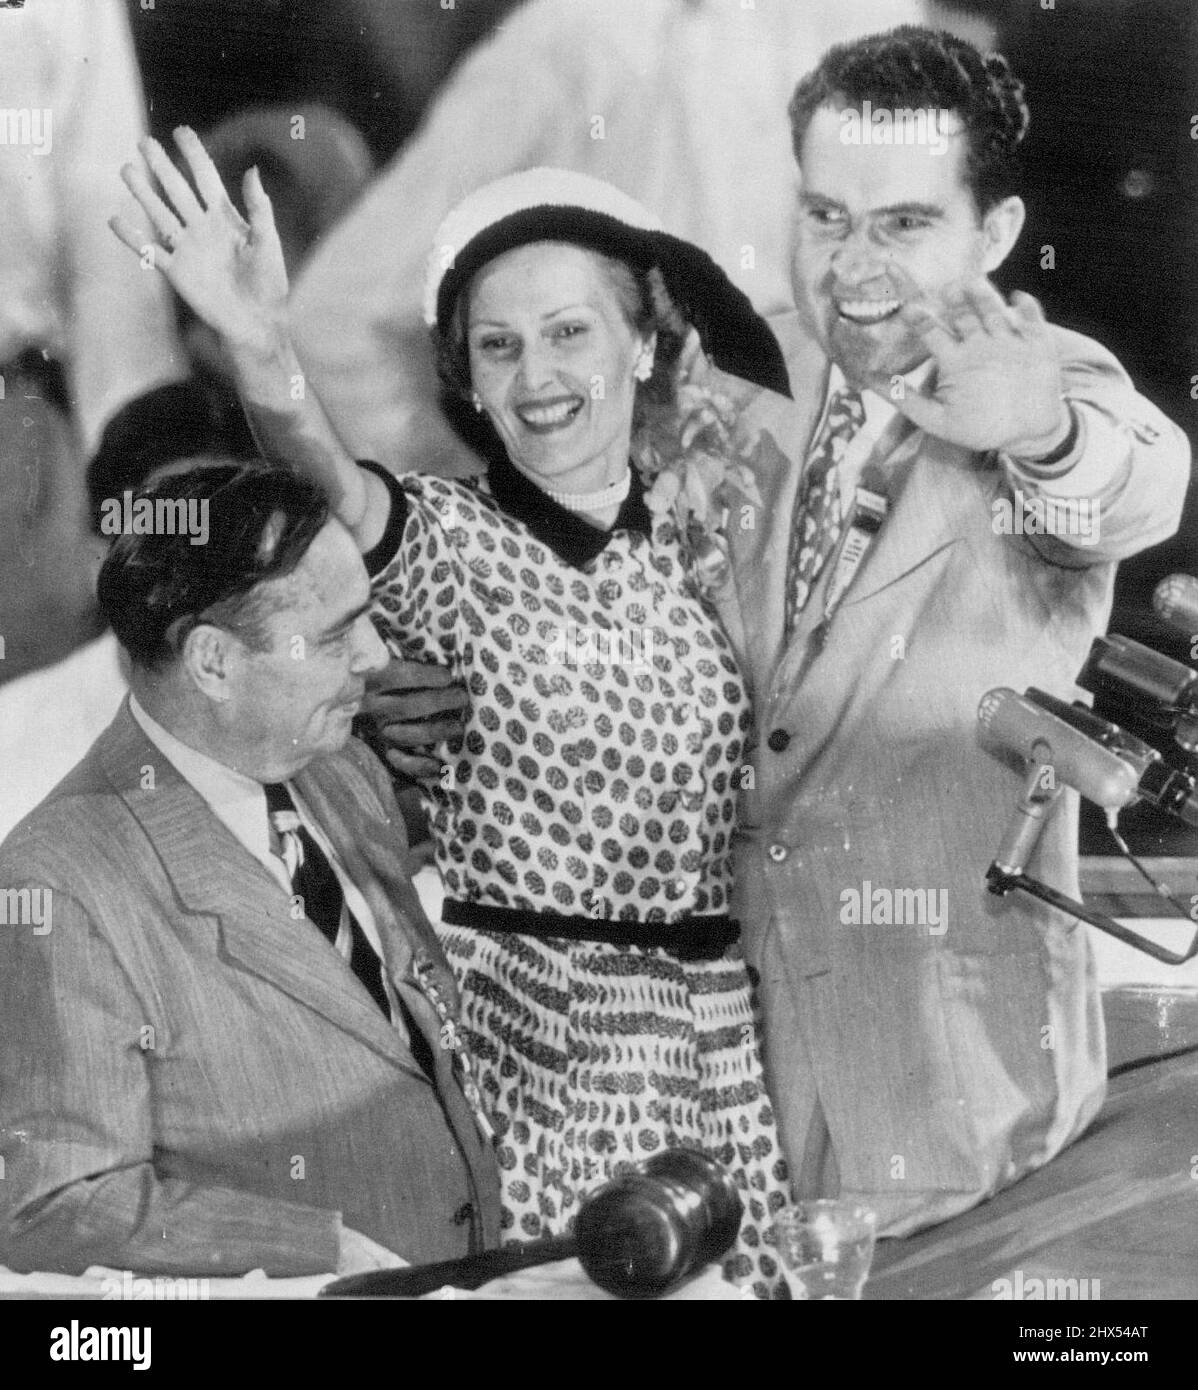 There's Joy On The Rostrum -- Sen. Richard Nixon and his wife wave to plaudits of delegates from speaker's podium after his selection to be Gen. Dwight D. Eisenhower's running mate on GOP presidential ticket. Nixon's selection as vice presidential candidate wan by acclamation. With them is Chairman Joseph Martin. July 11, 1952. (Photo by AP Wirephoto). Stock Photo